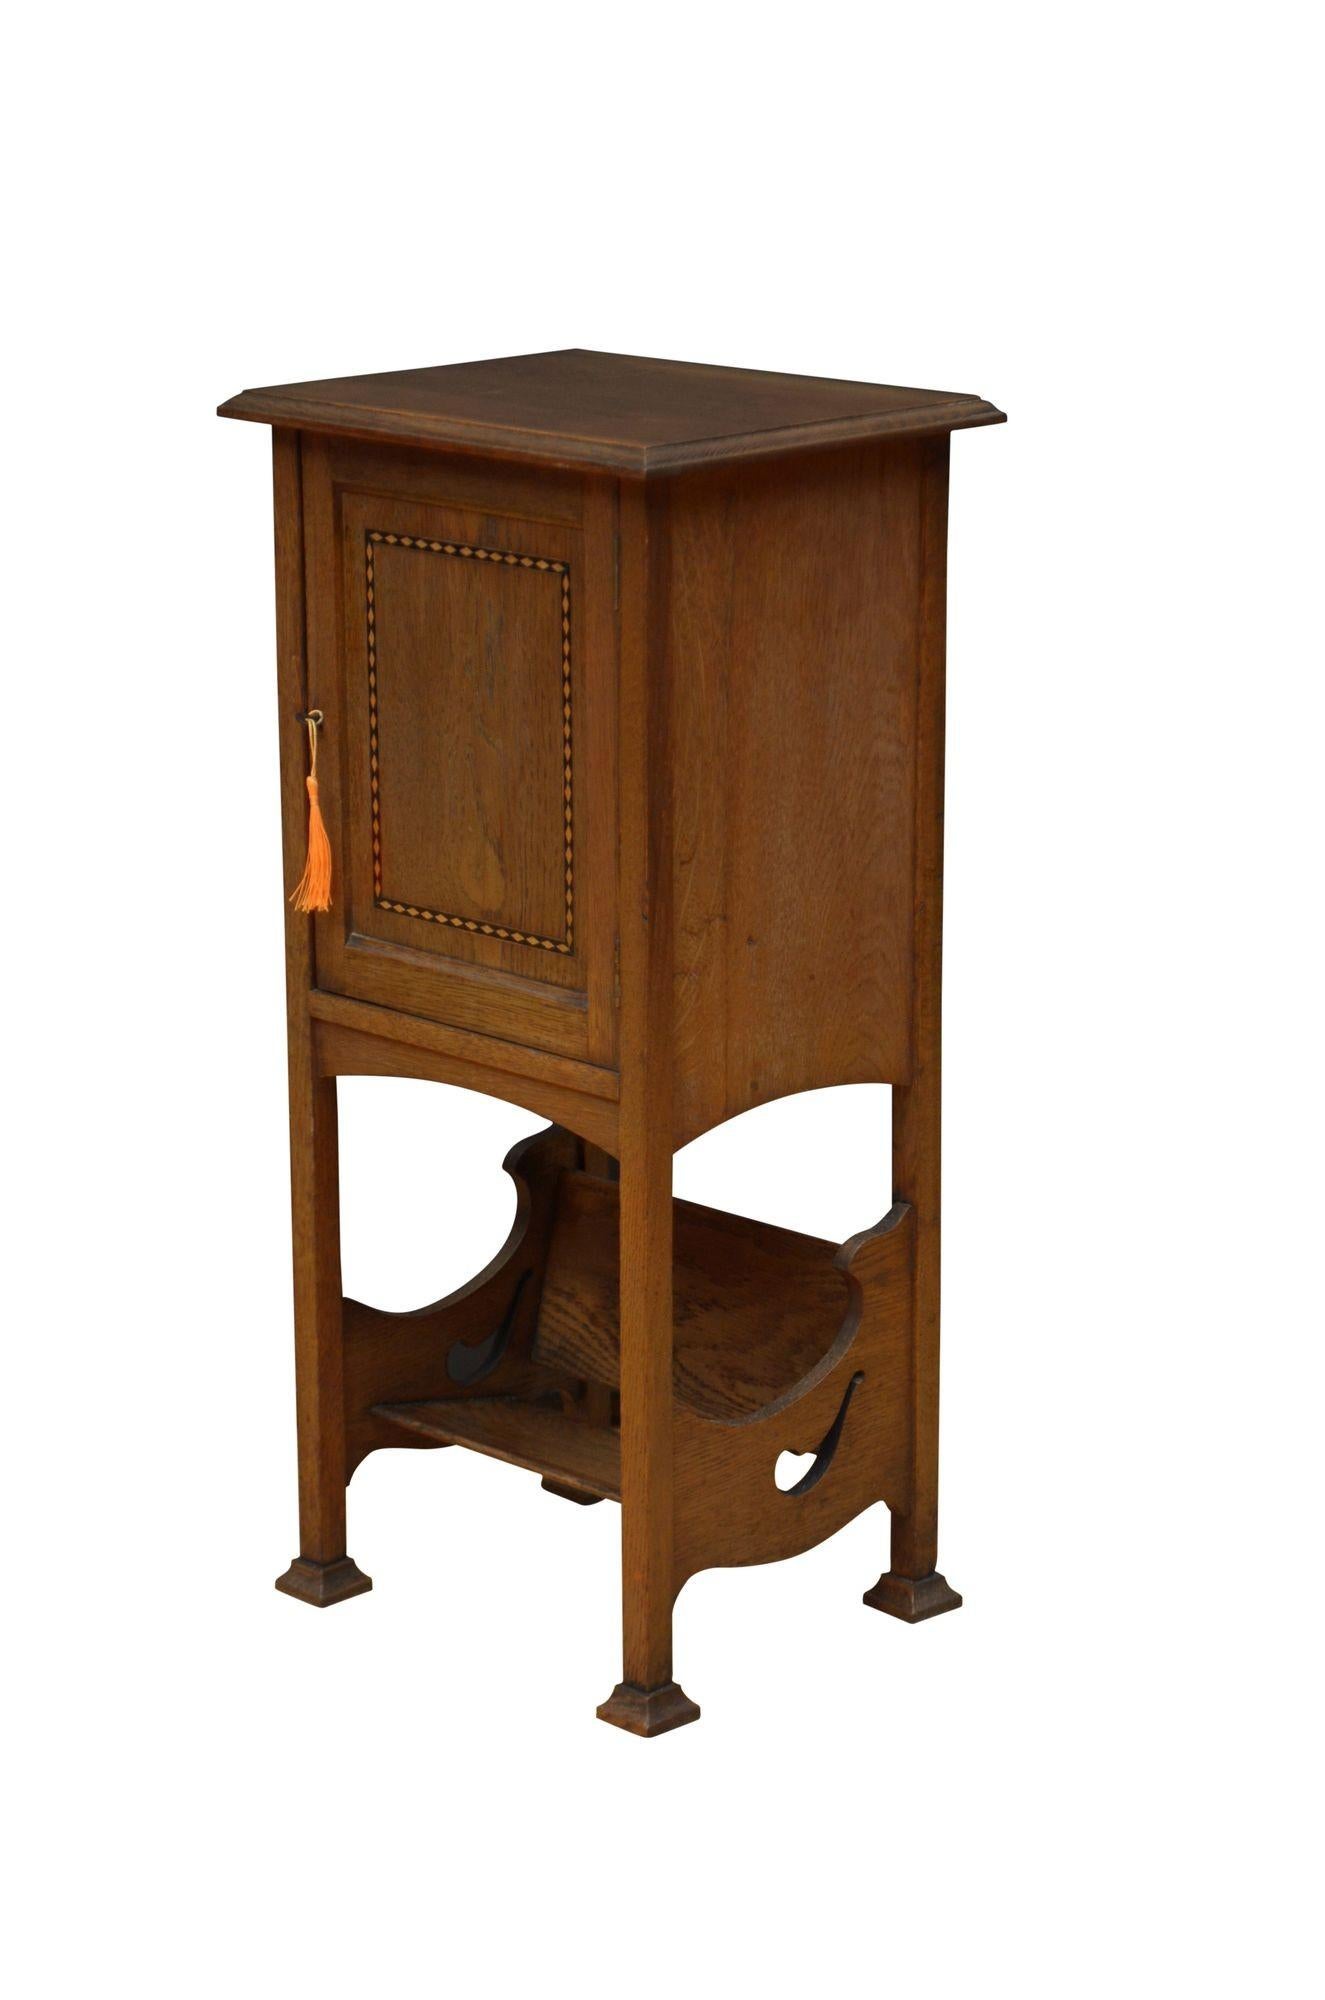 English Arts and Crafts Bedside Cabinet in Oak